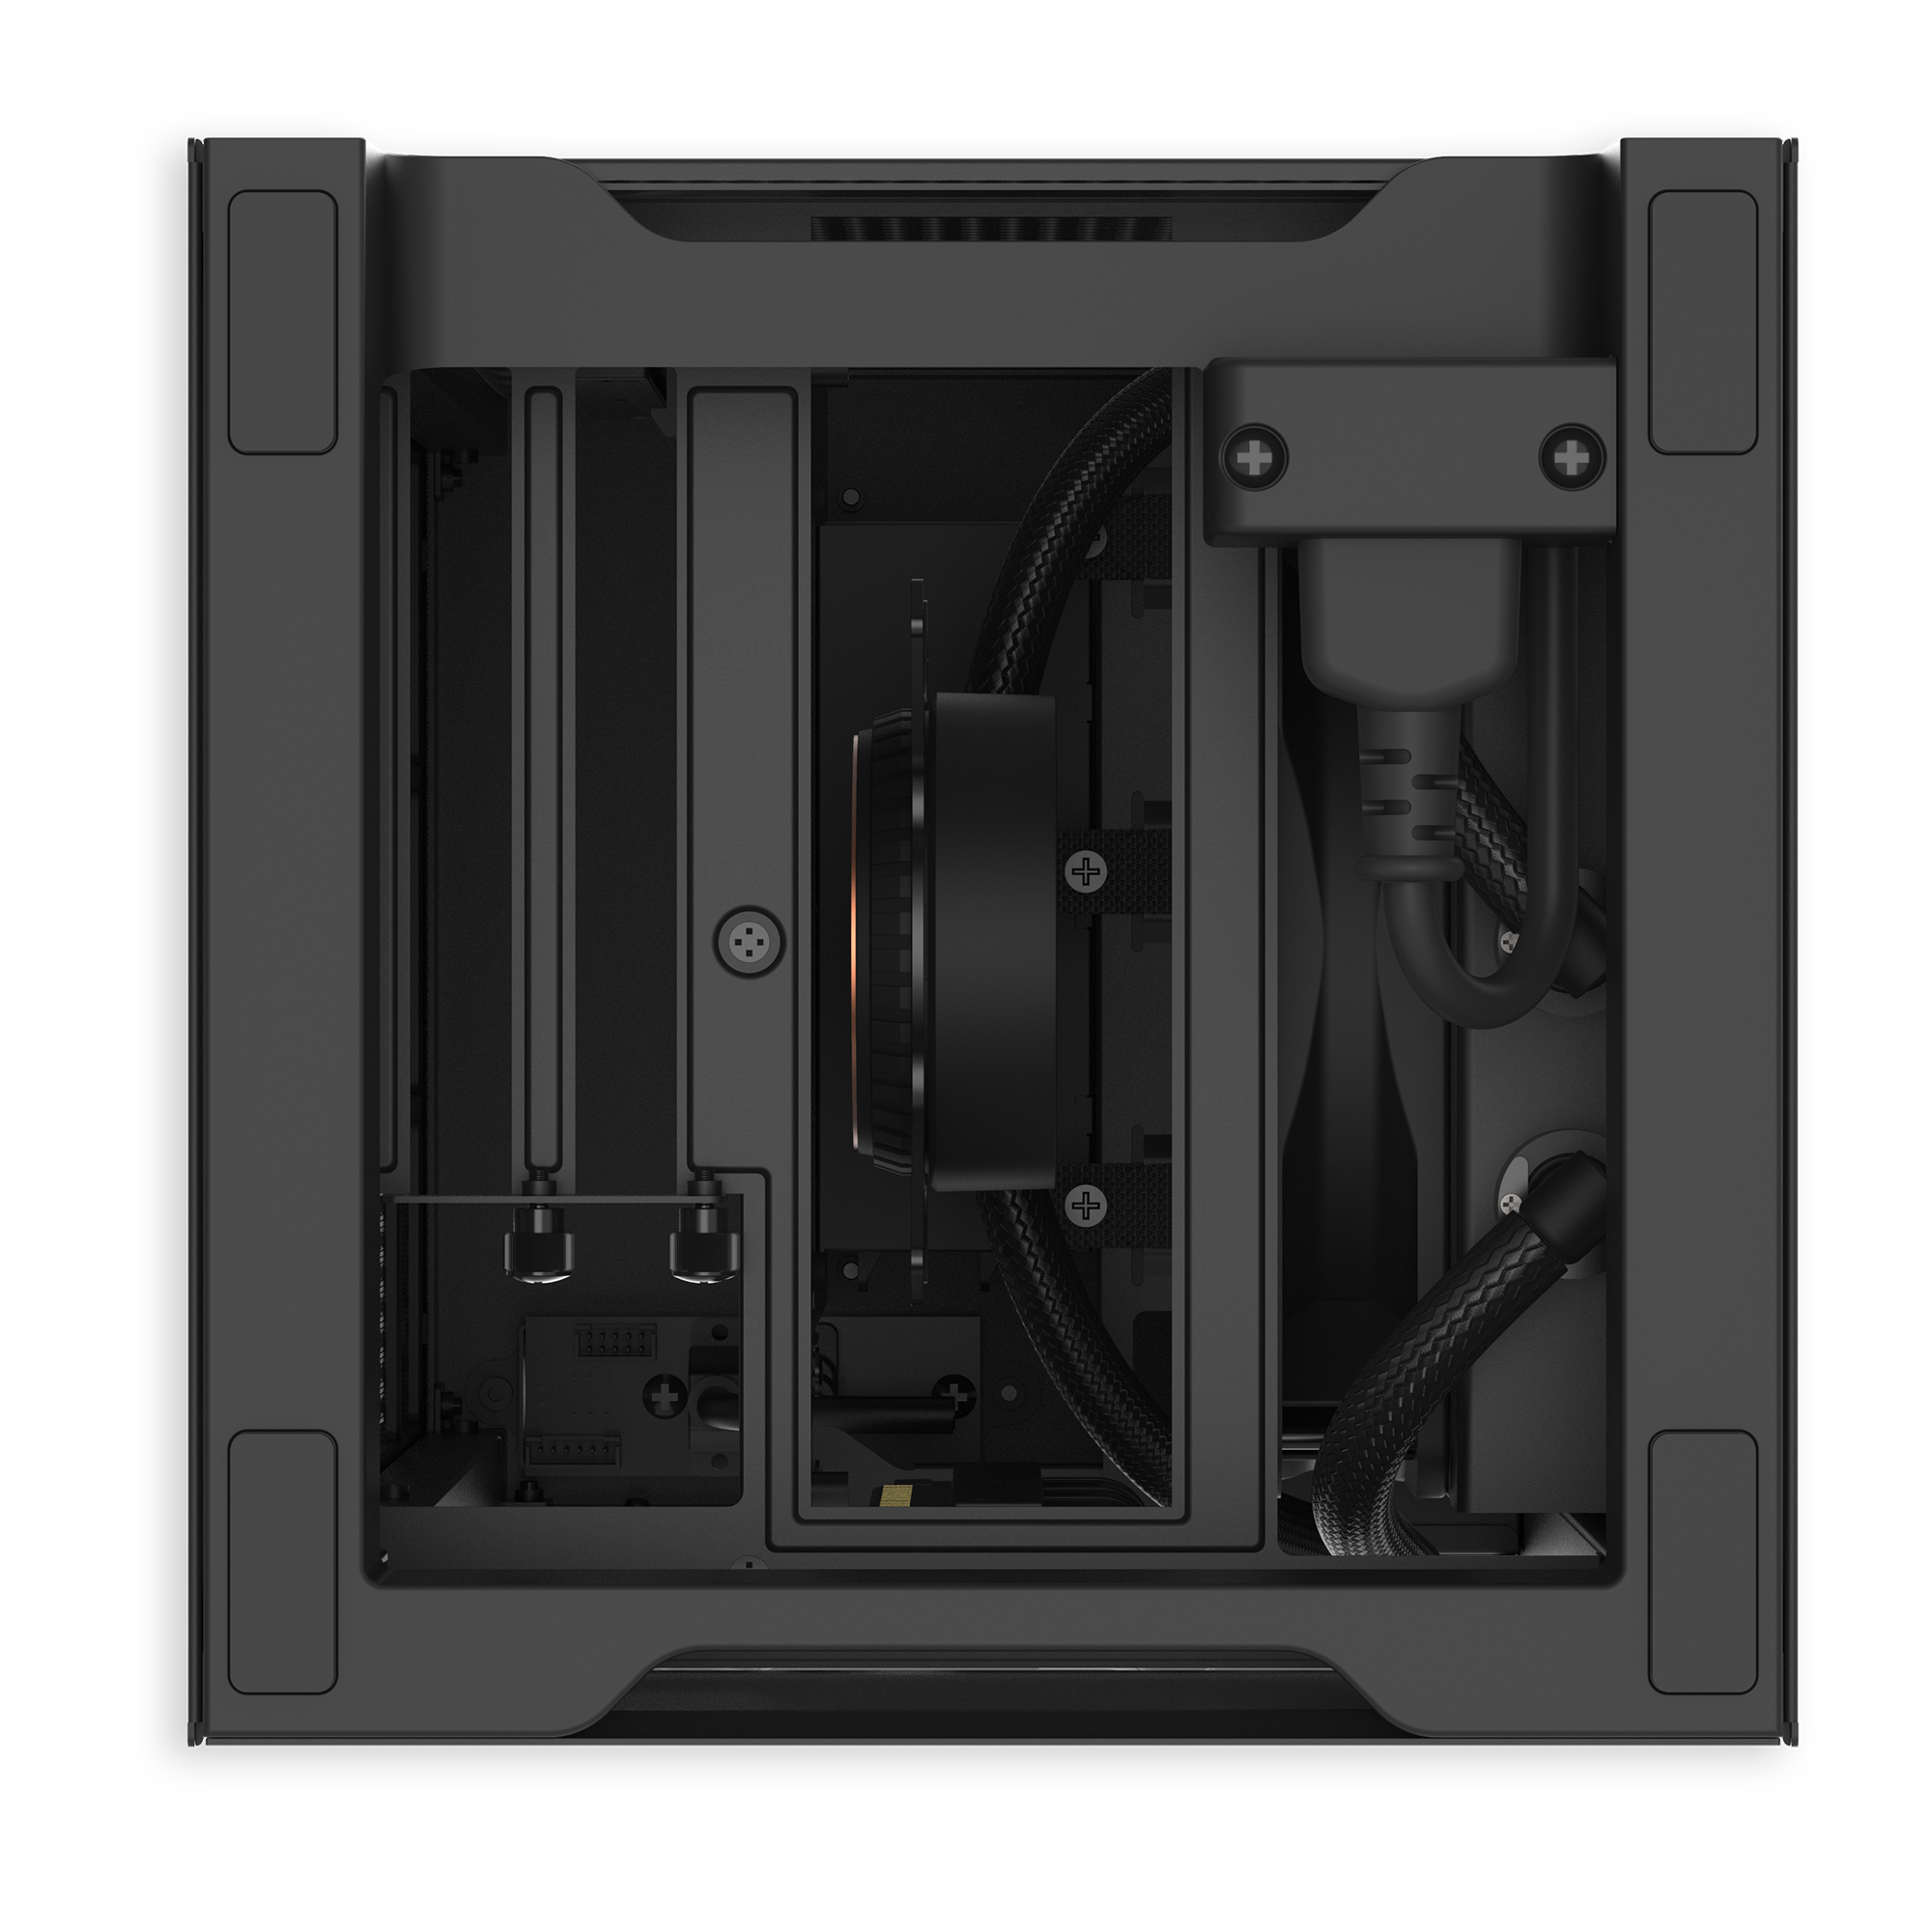 NZXT Announces the H1 Small Form Factor Mini-ITX Case